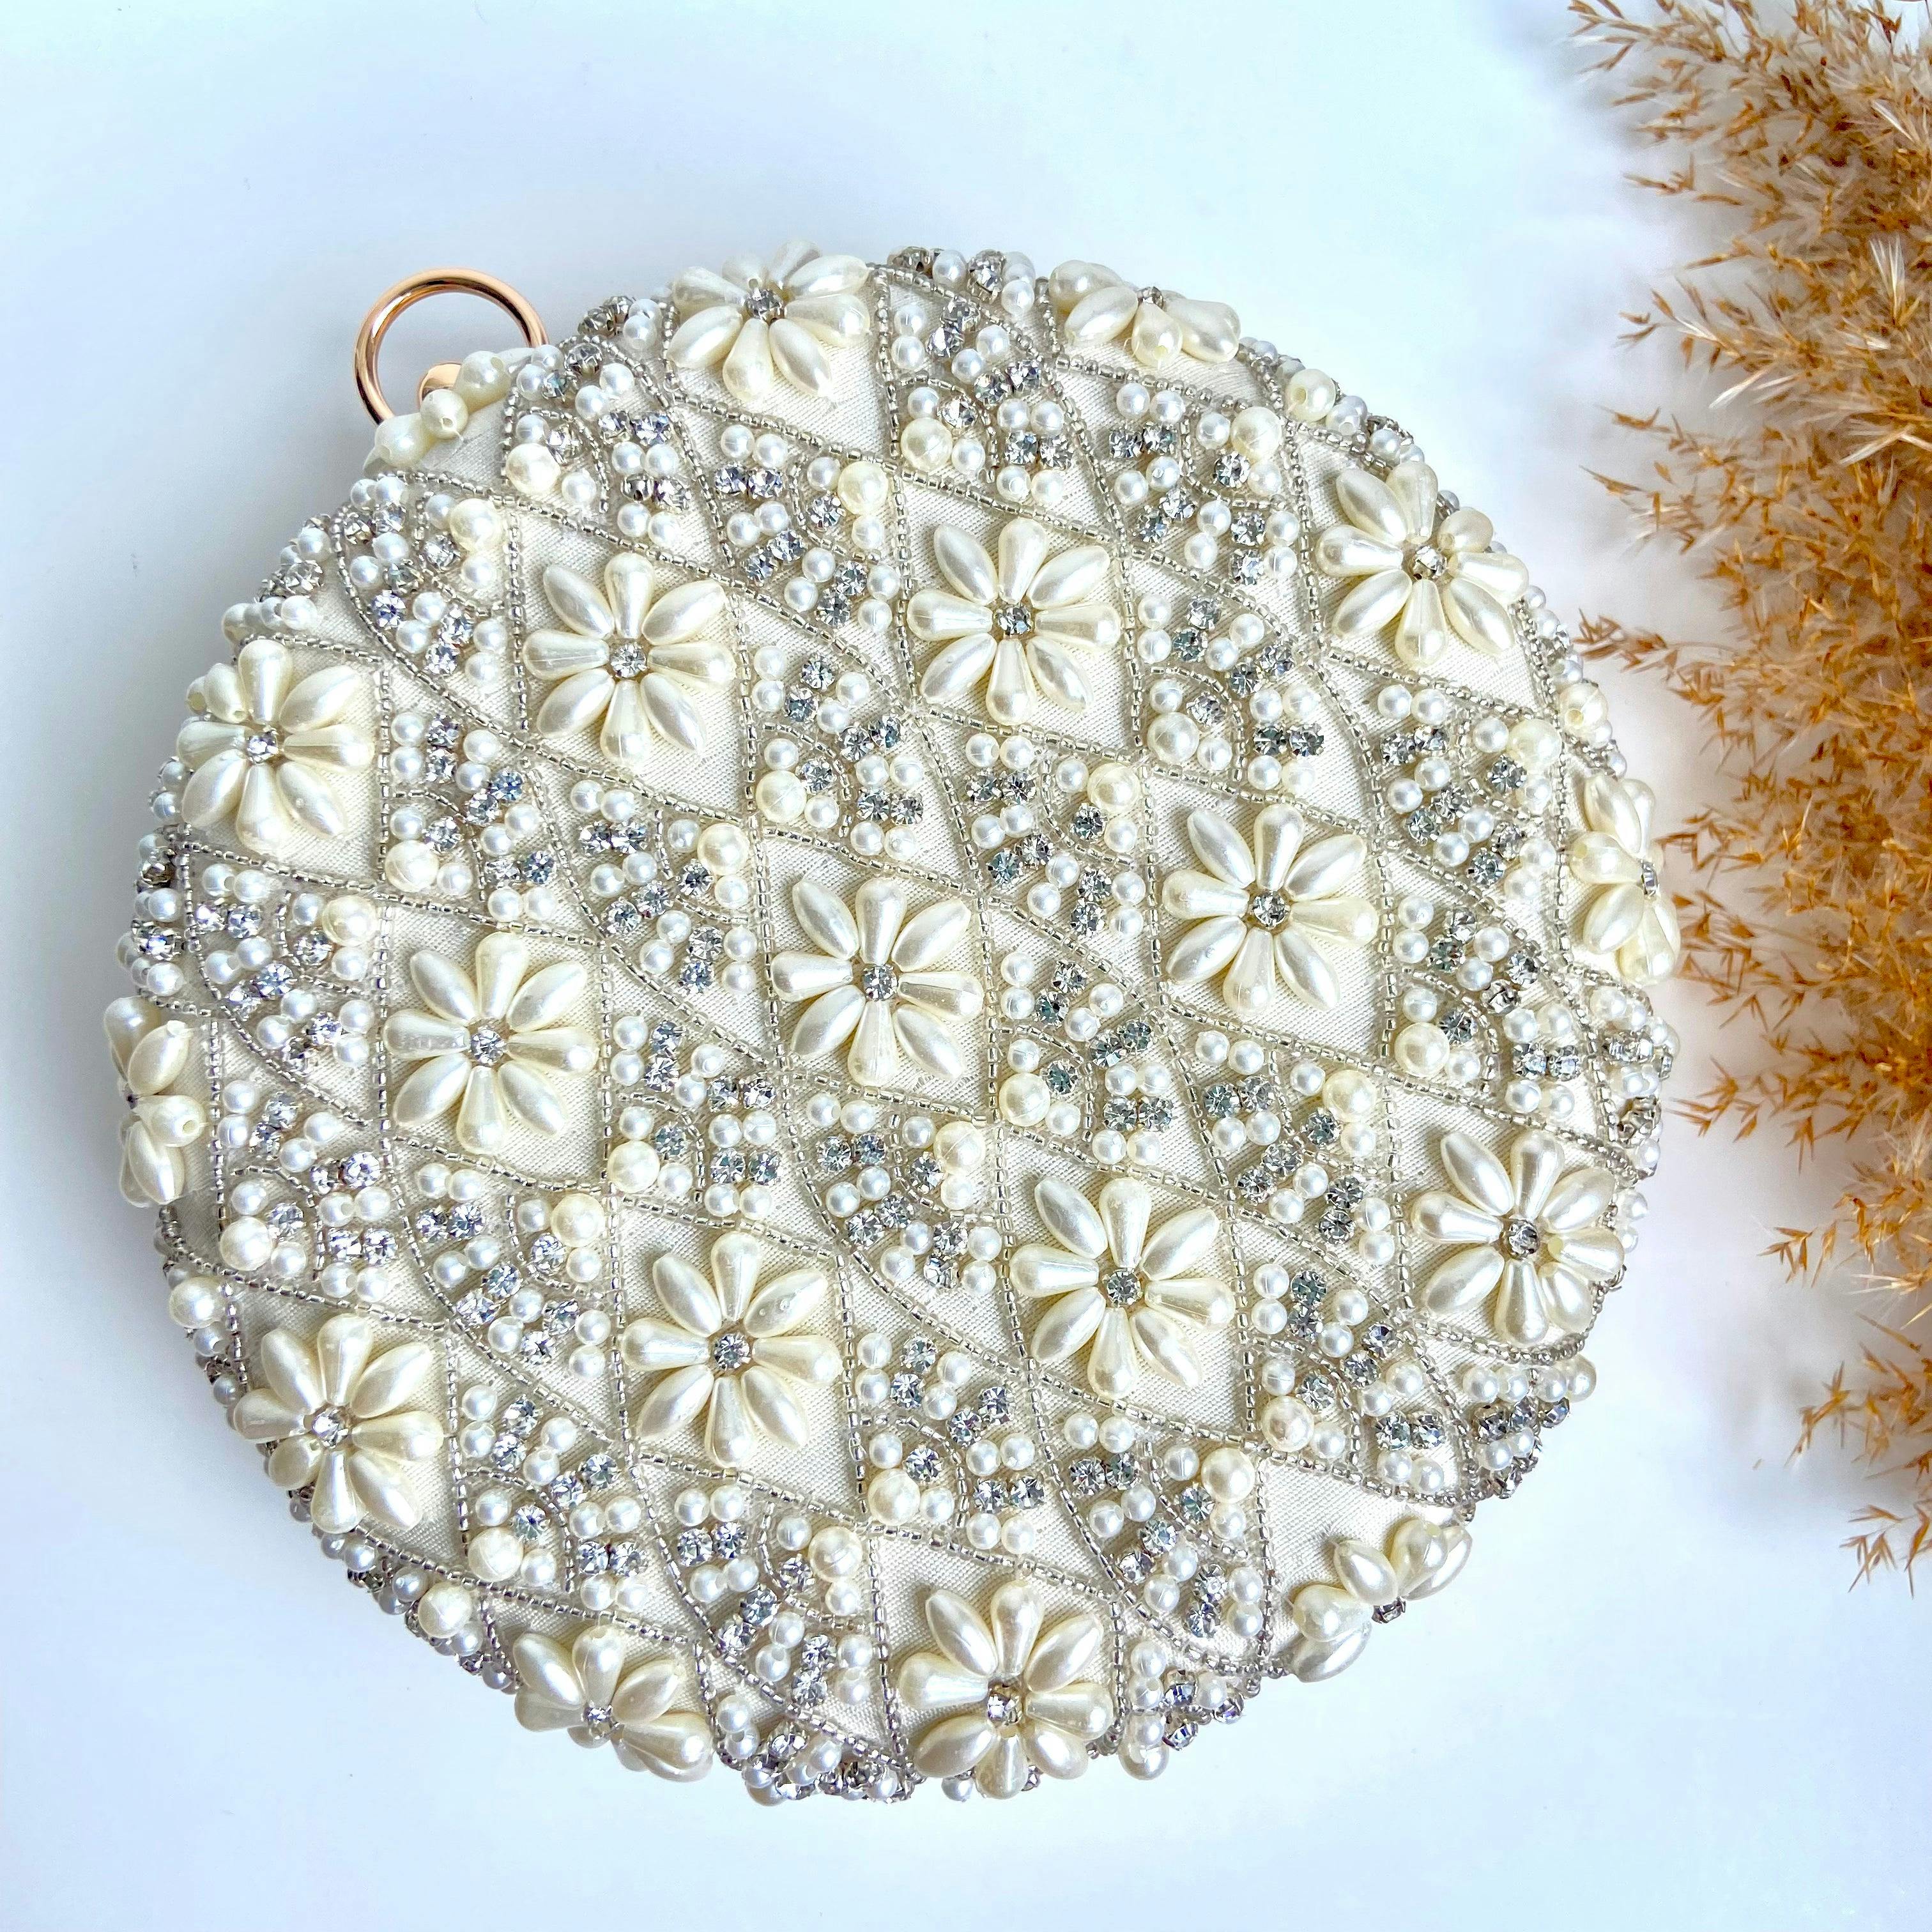 ALIA Pearl round clutch, a product by Clutcheeet